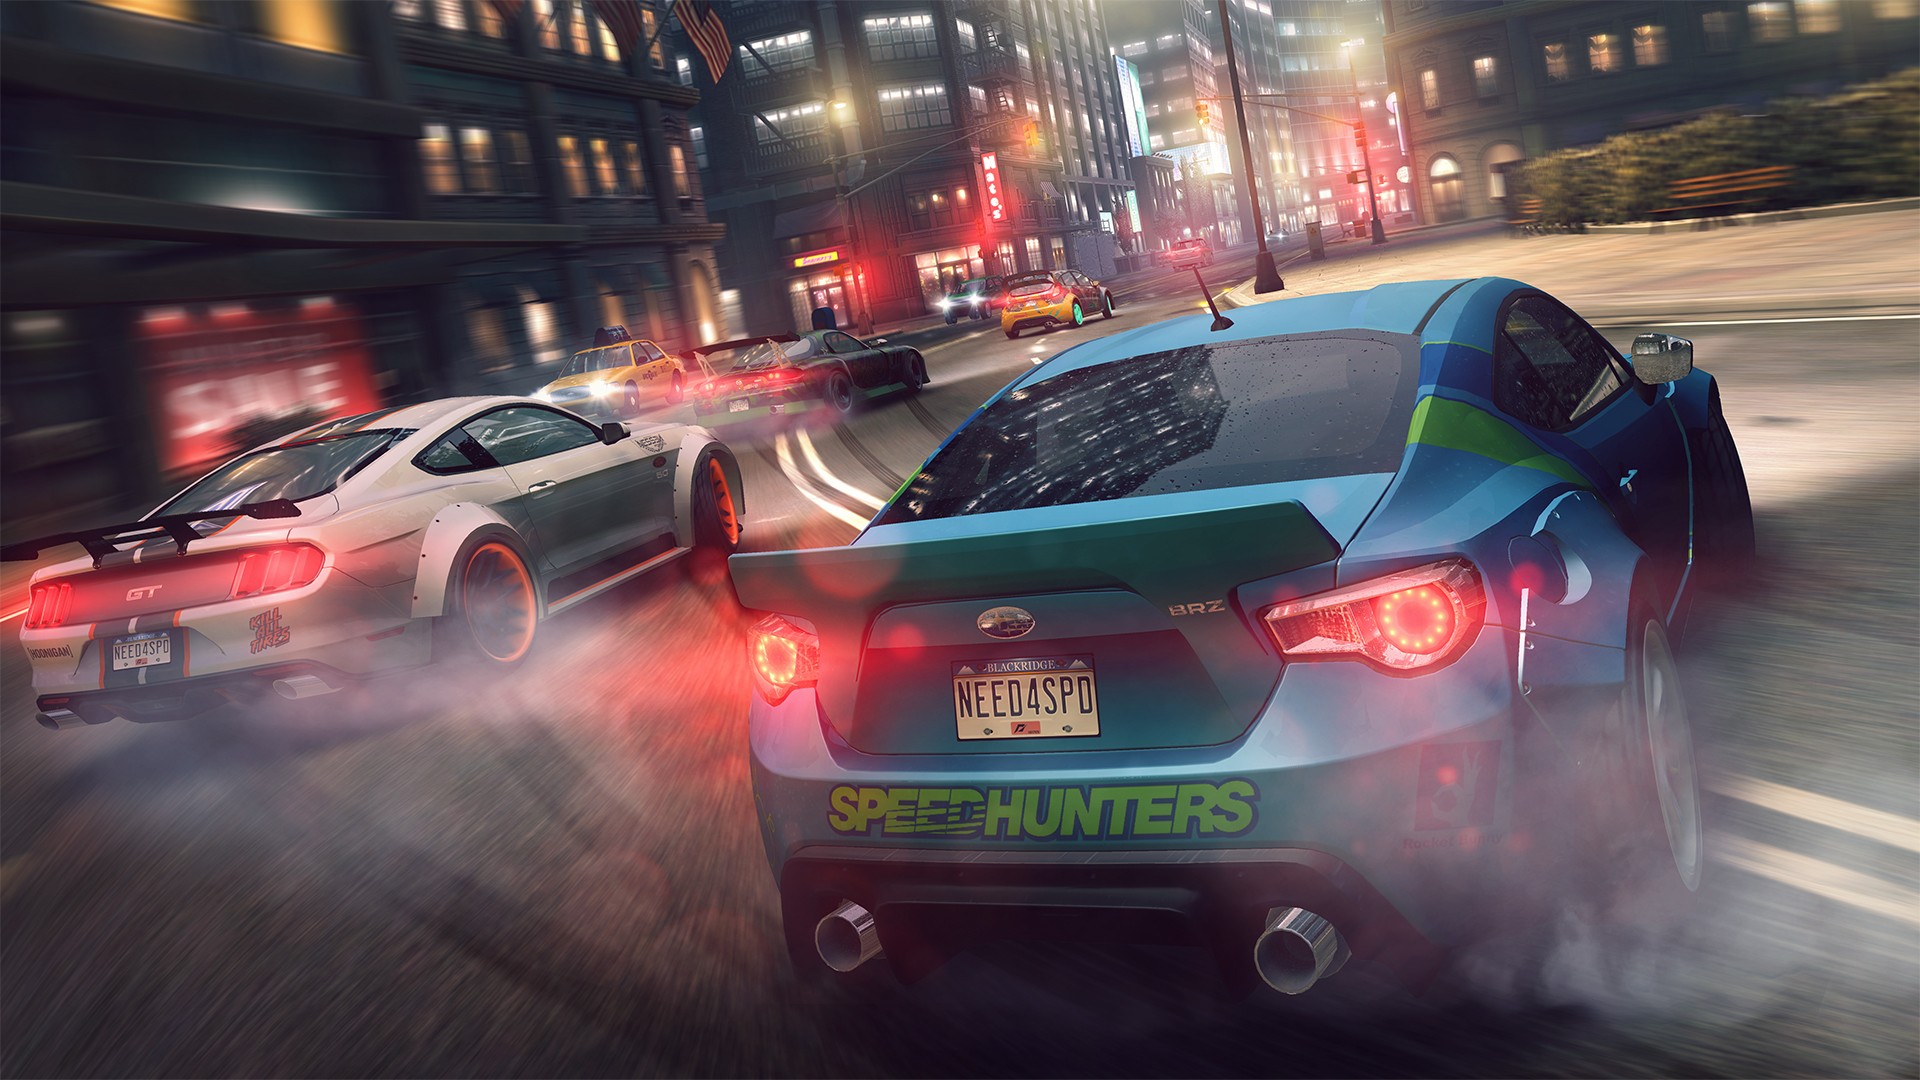 Need for Speed: No Limits, Video games, Night, City, Subaru BRZ, Ford Mustang GT, Mazda RX 8, Ford Fiesta ST, Tuning, Street, Speedhunters, Drifting, Need for Speed Wallpaper